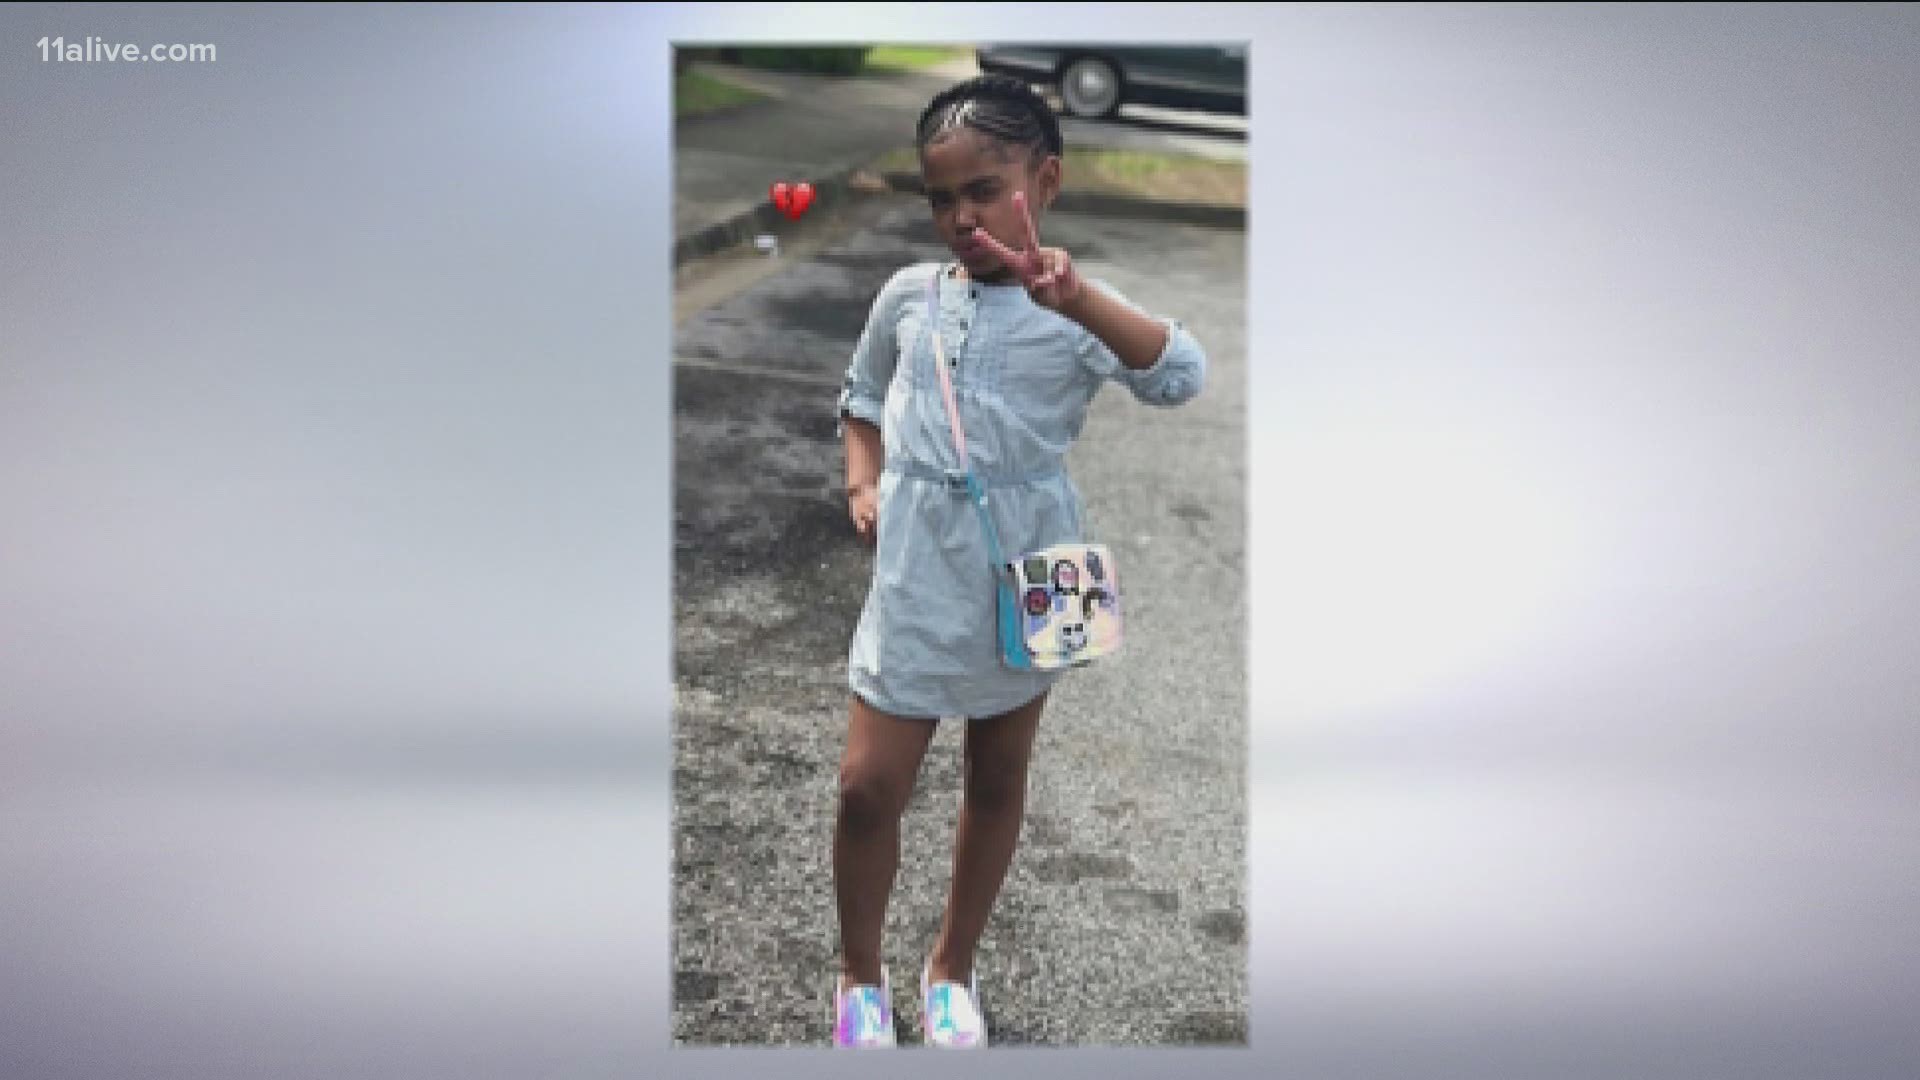 The Atlanta City Council held a moment of silence for the eight-year-old shot and killed over the weekend.